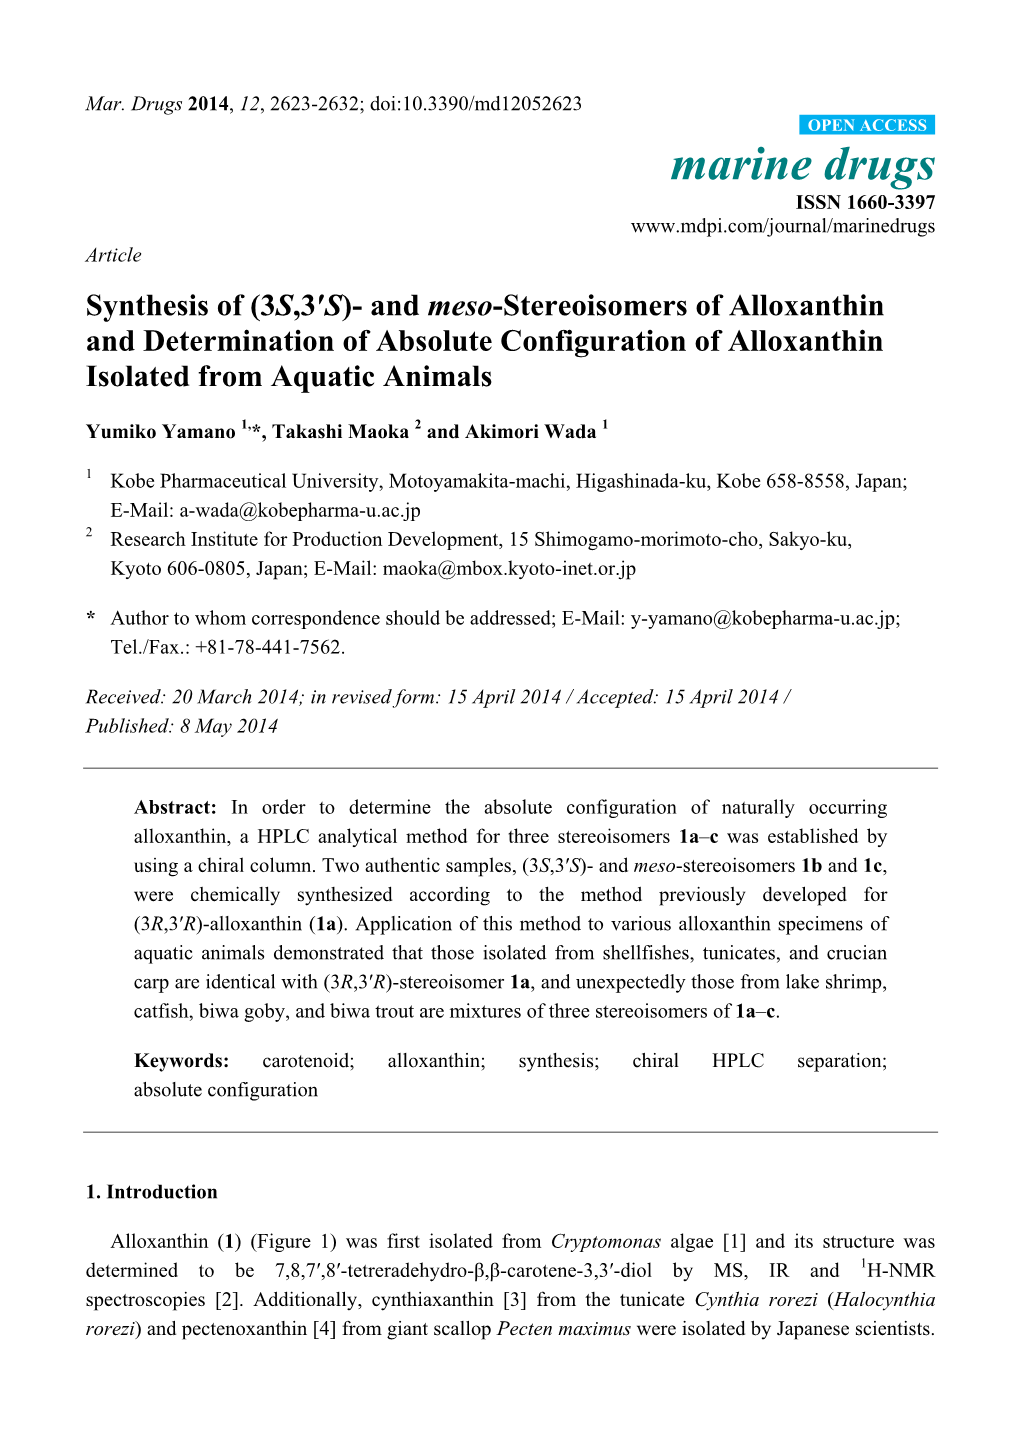 Synthesis of (3S,3′S)- and Meso-Stereoisomers of Alloxanthin and Determination of Absolute Configuration of Alloxanthin Isolated from Aquatic Animals